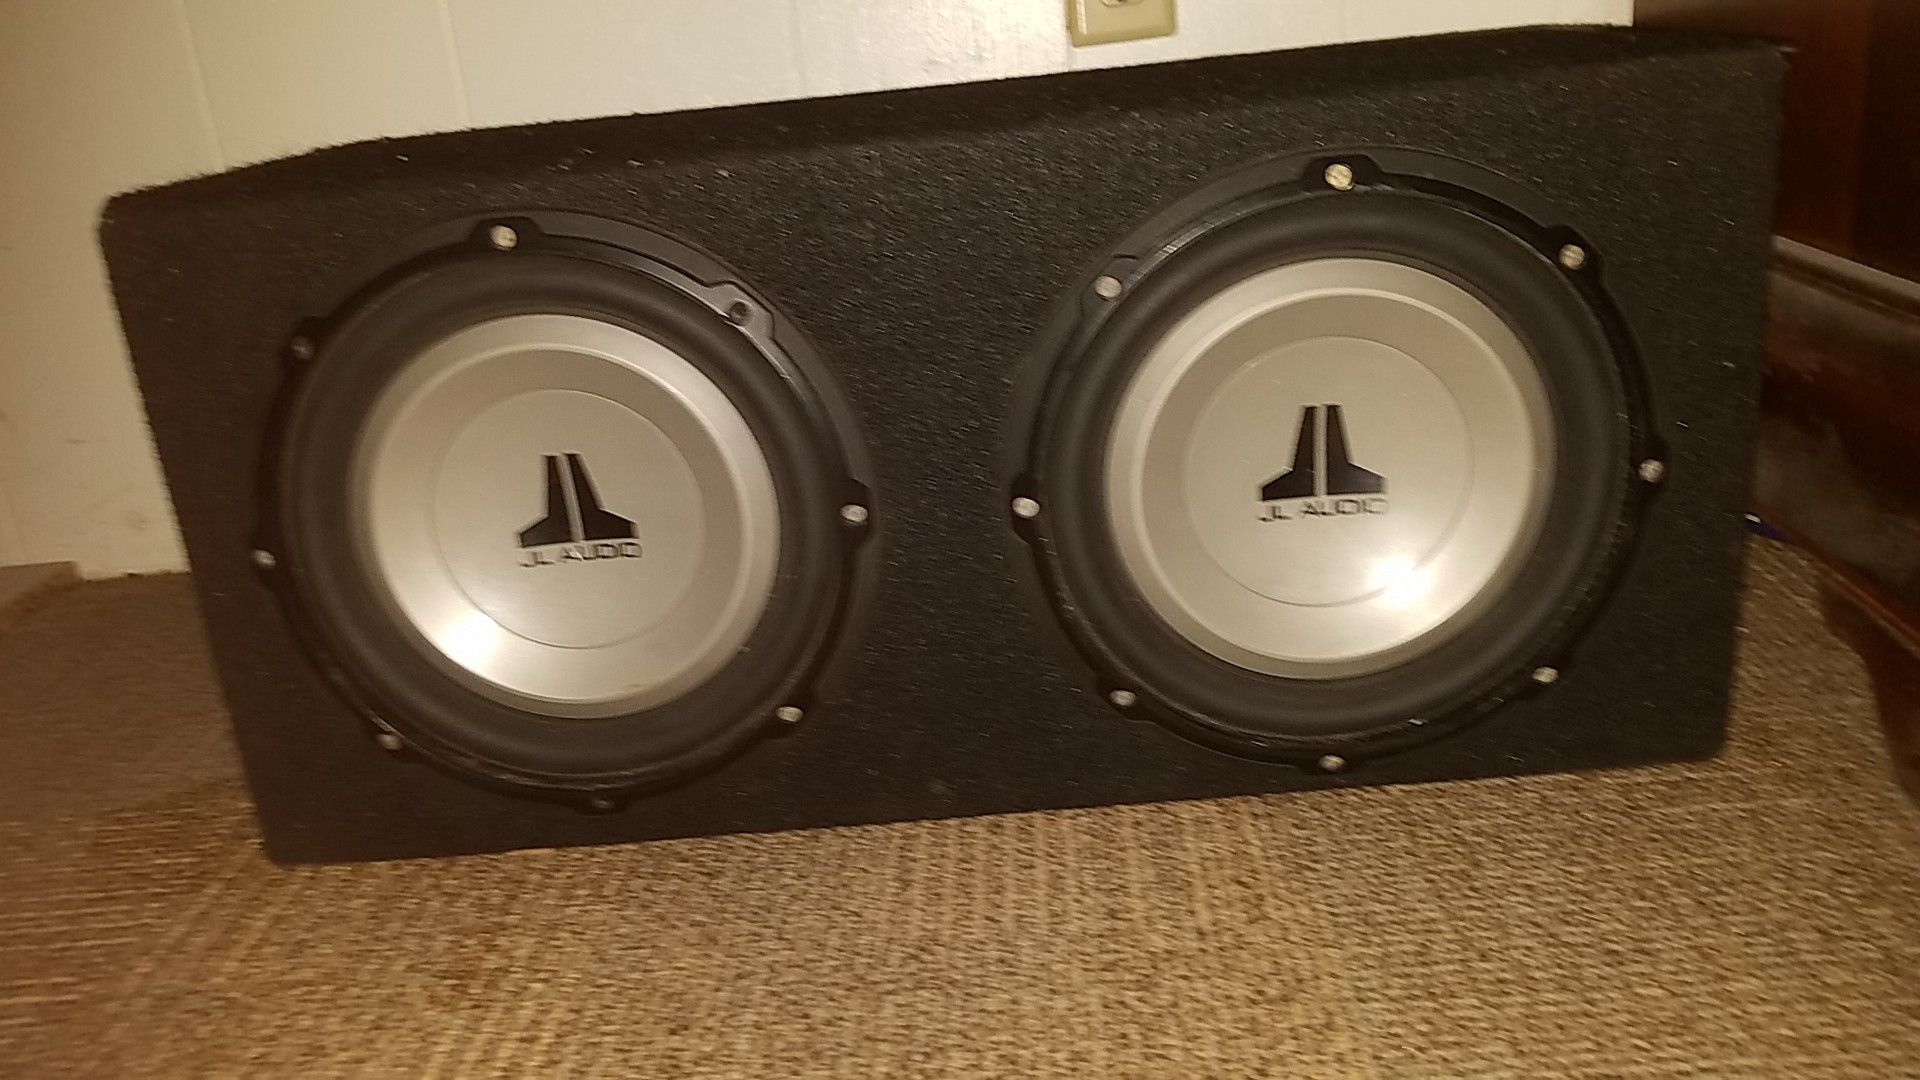 SUBS (2) 10" JL AUDIO SUBWOOFERS WITH AMP INCLUDED